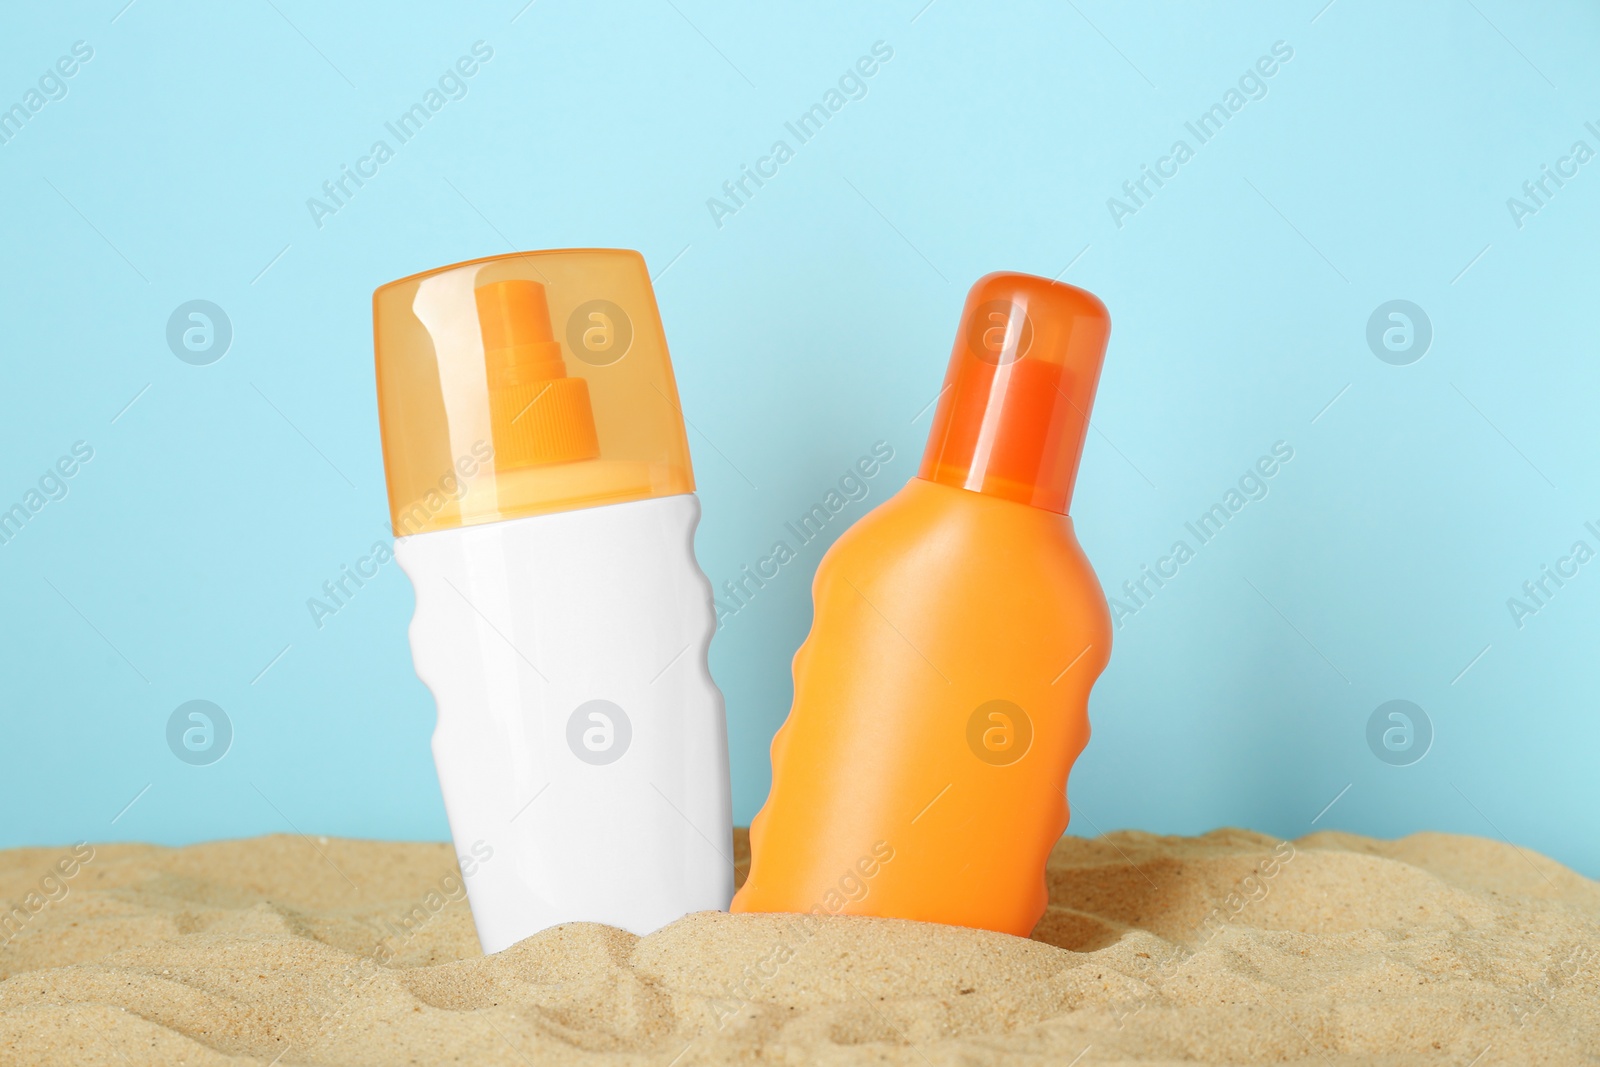 Photo of Suntan products on sand against light blue background